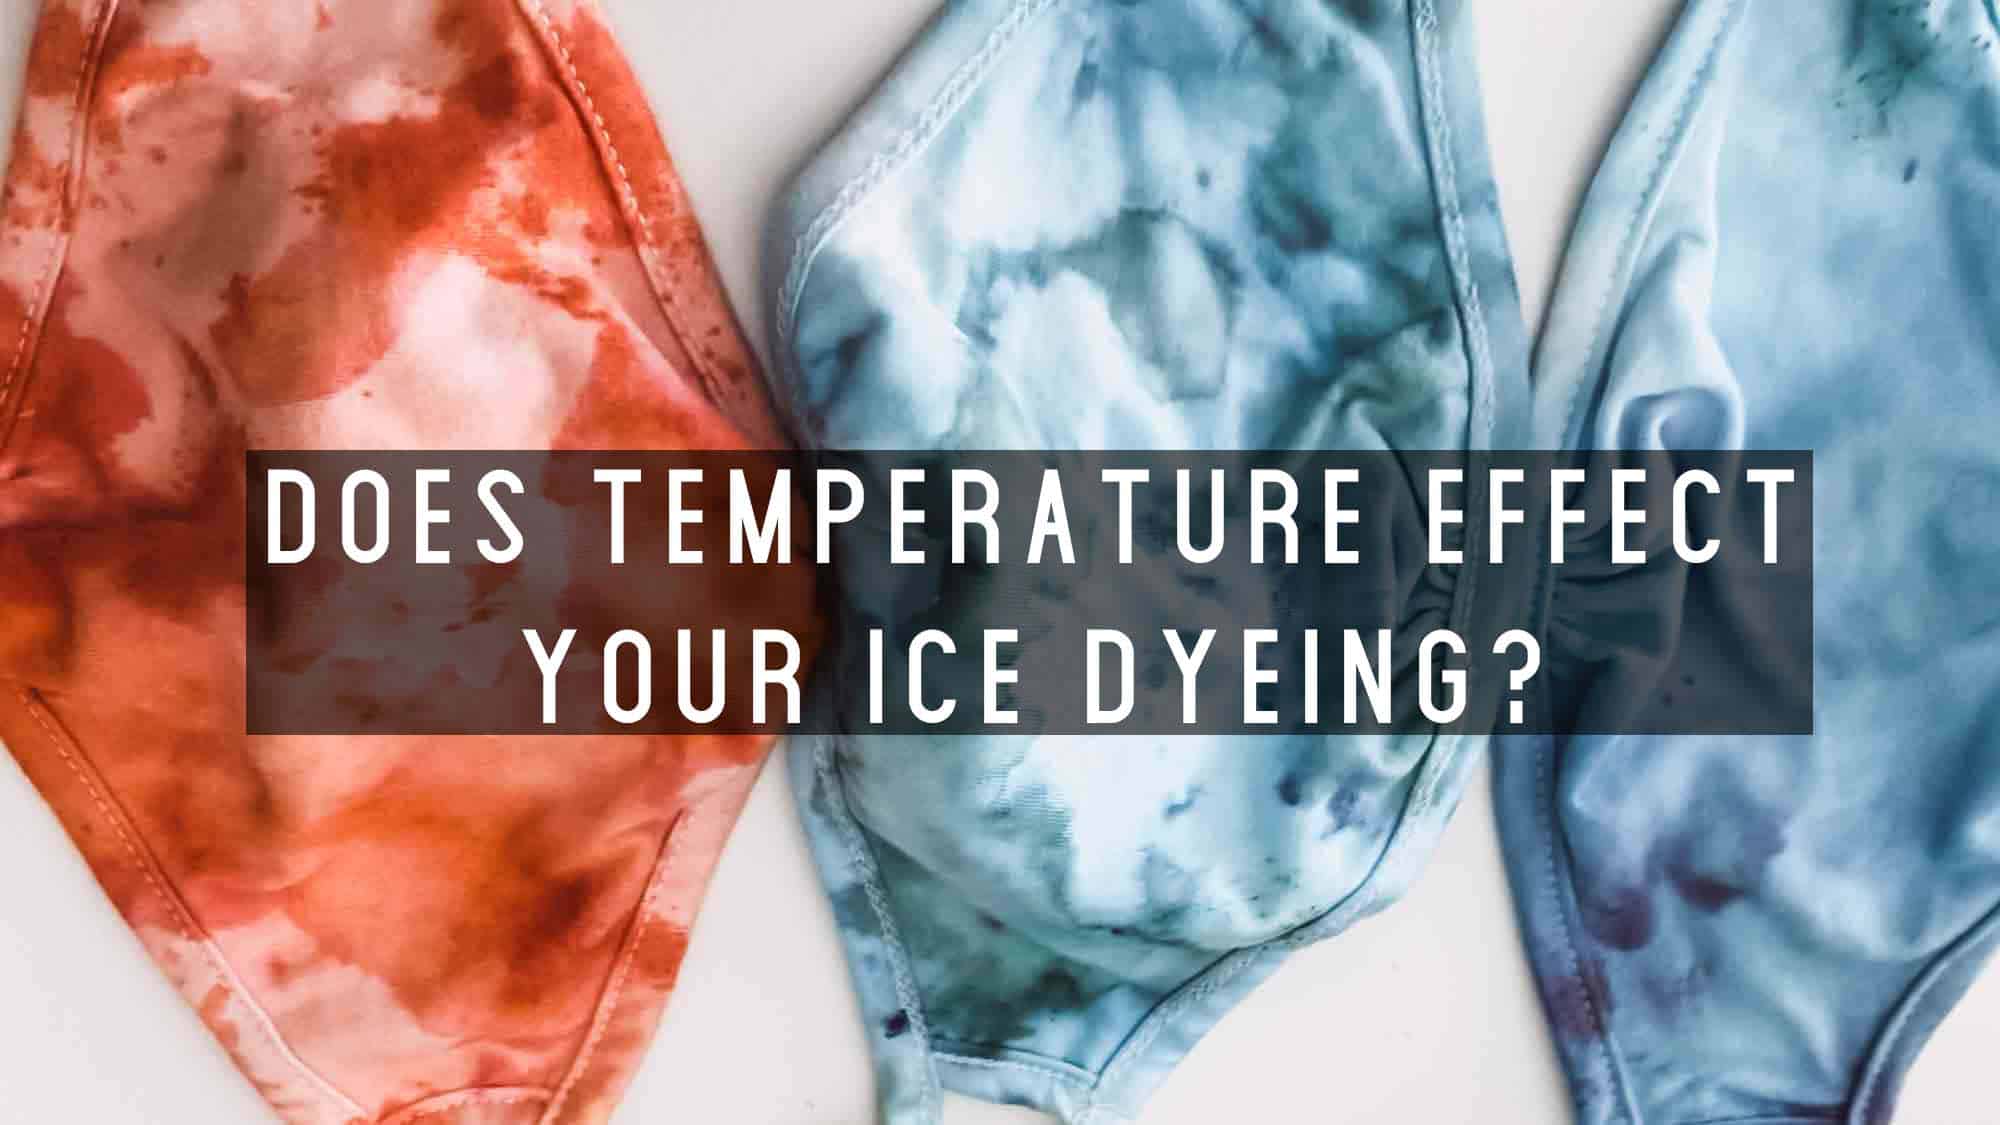 Ice tie dye is so simple and fun. Does the speed at which the ice melts matter? I experimented for you so you can do ice tie dye in any weather.